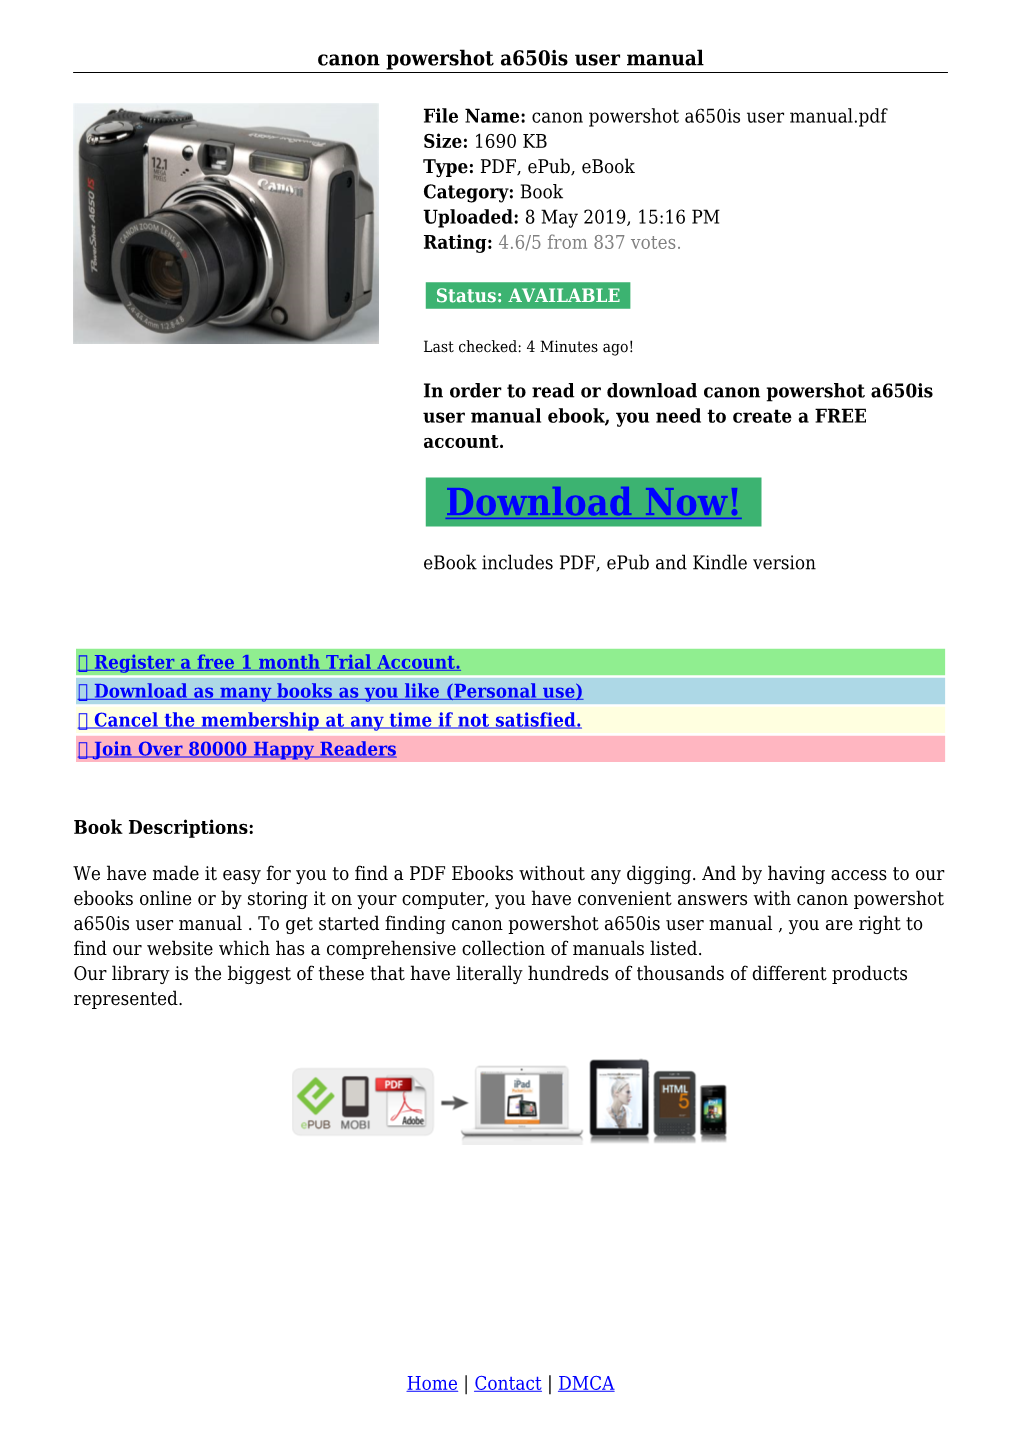 Canon Powershot A650is User Manual